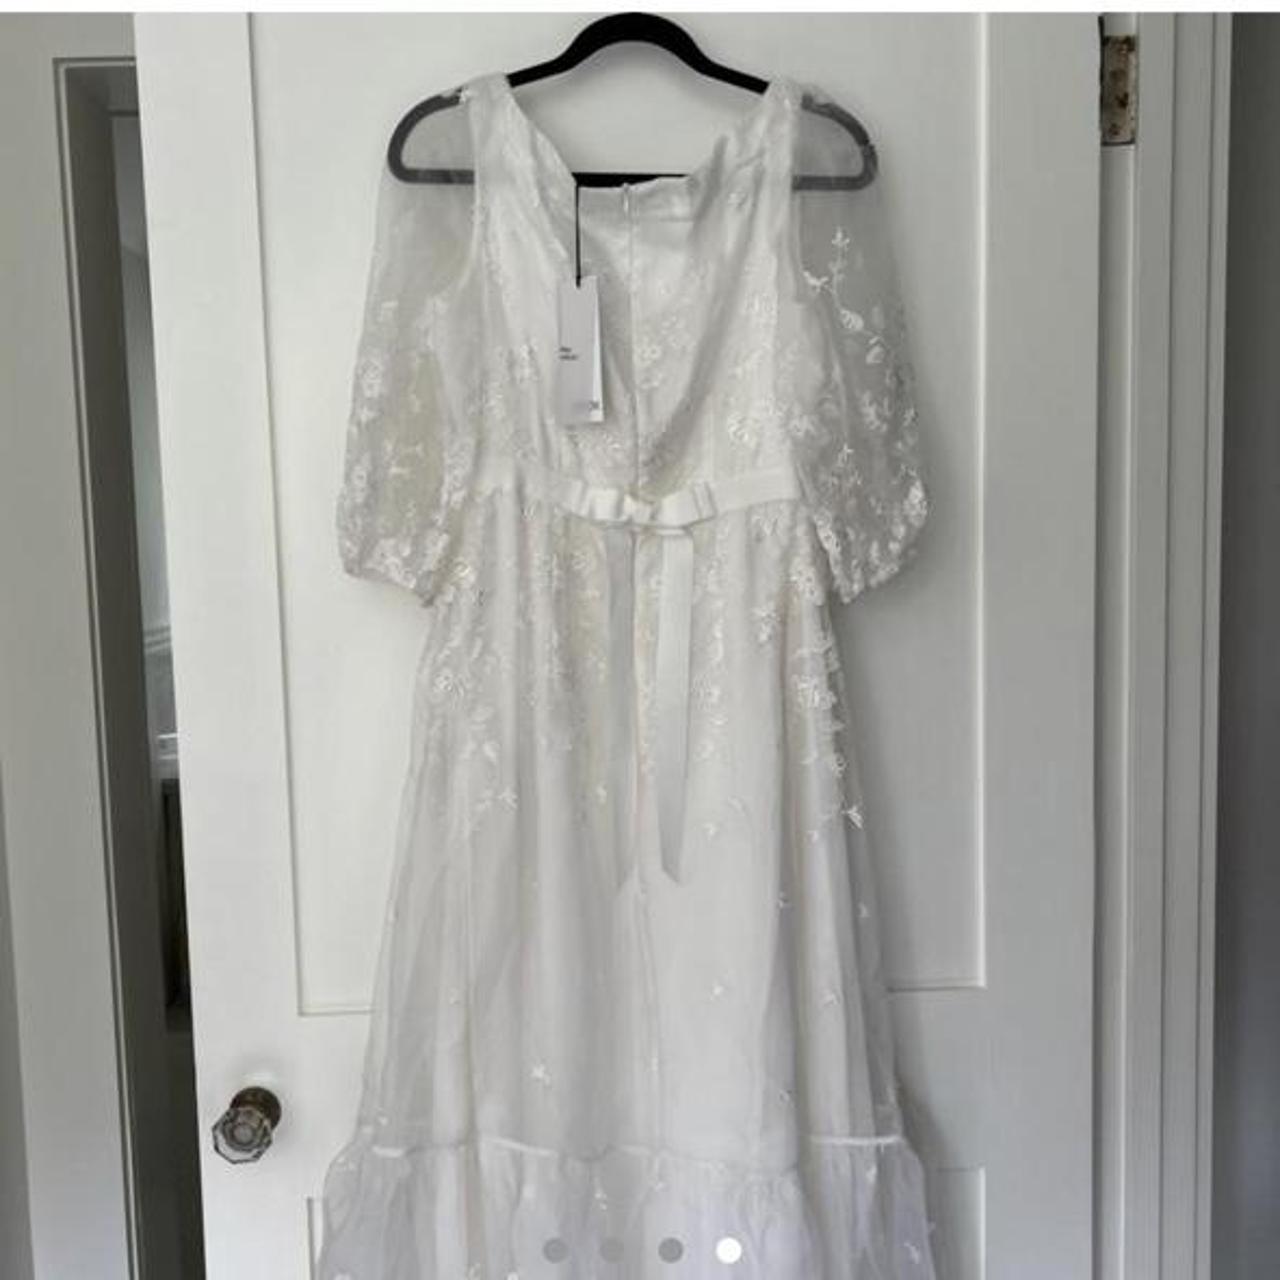 Product Image 4 - Floredice Wedding Dress Floral Embroidered